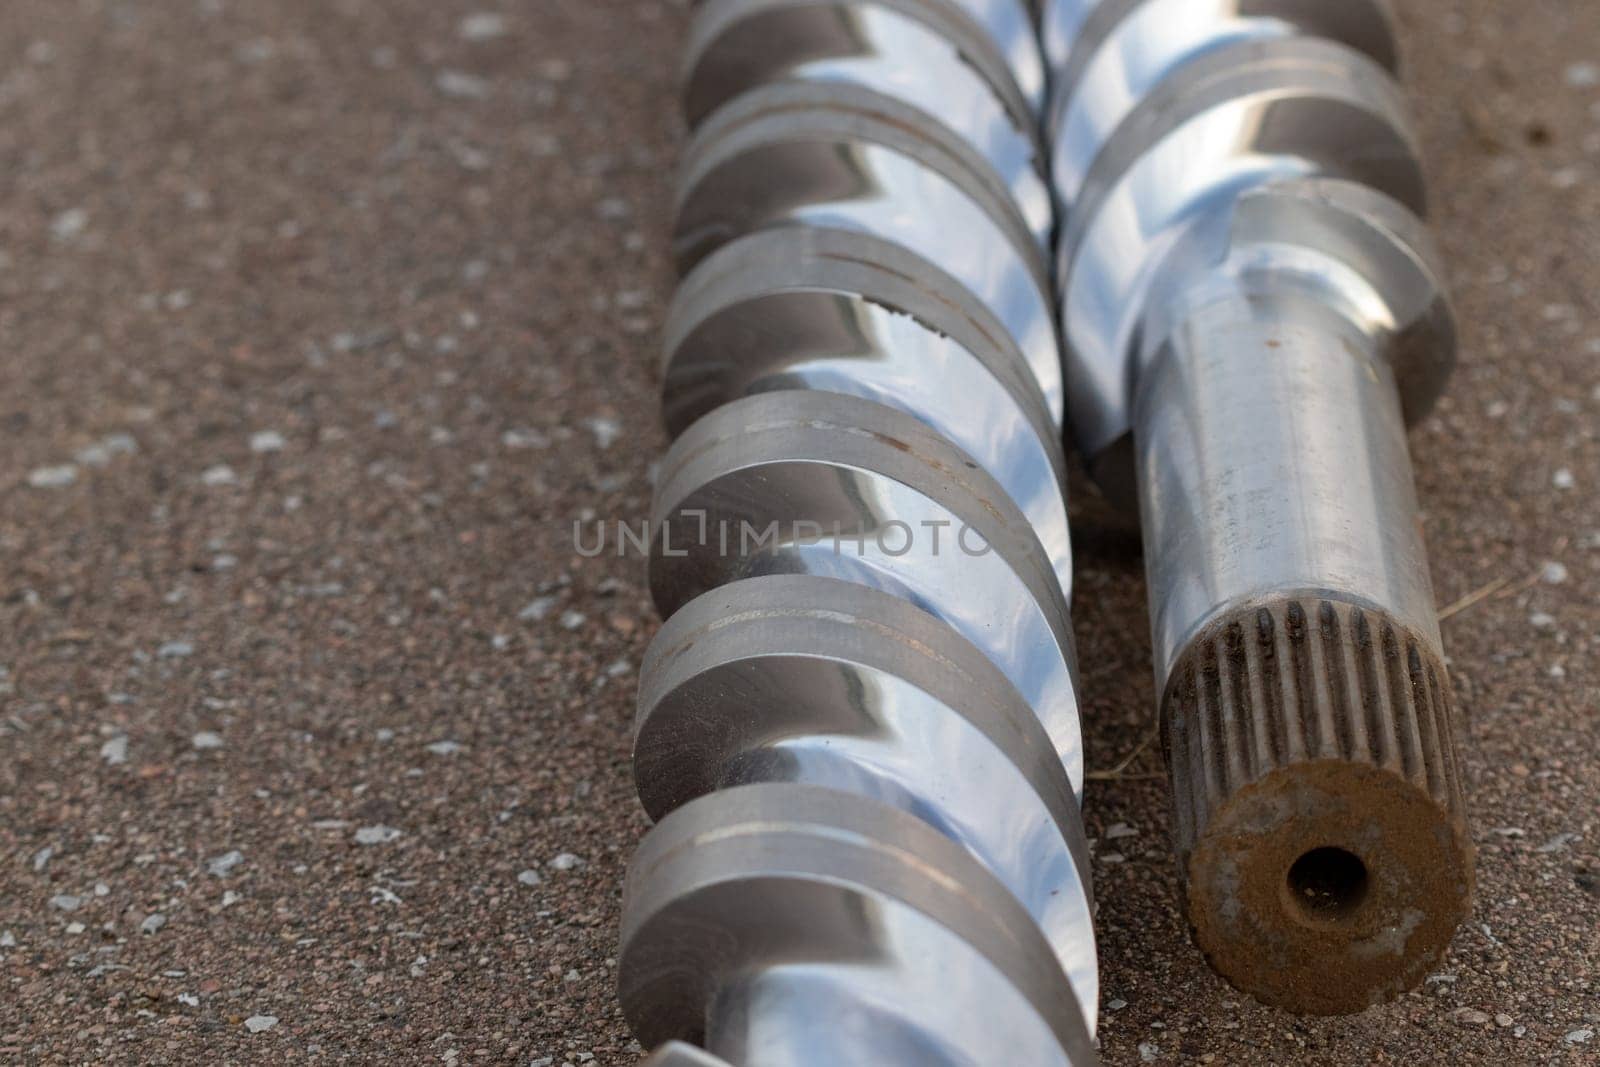 Scrap parts Blending machine screws laying outside . High quality photo